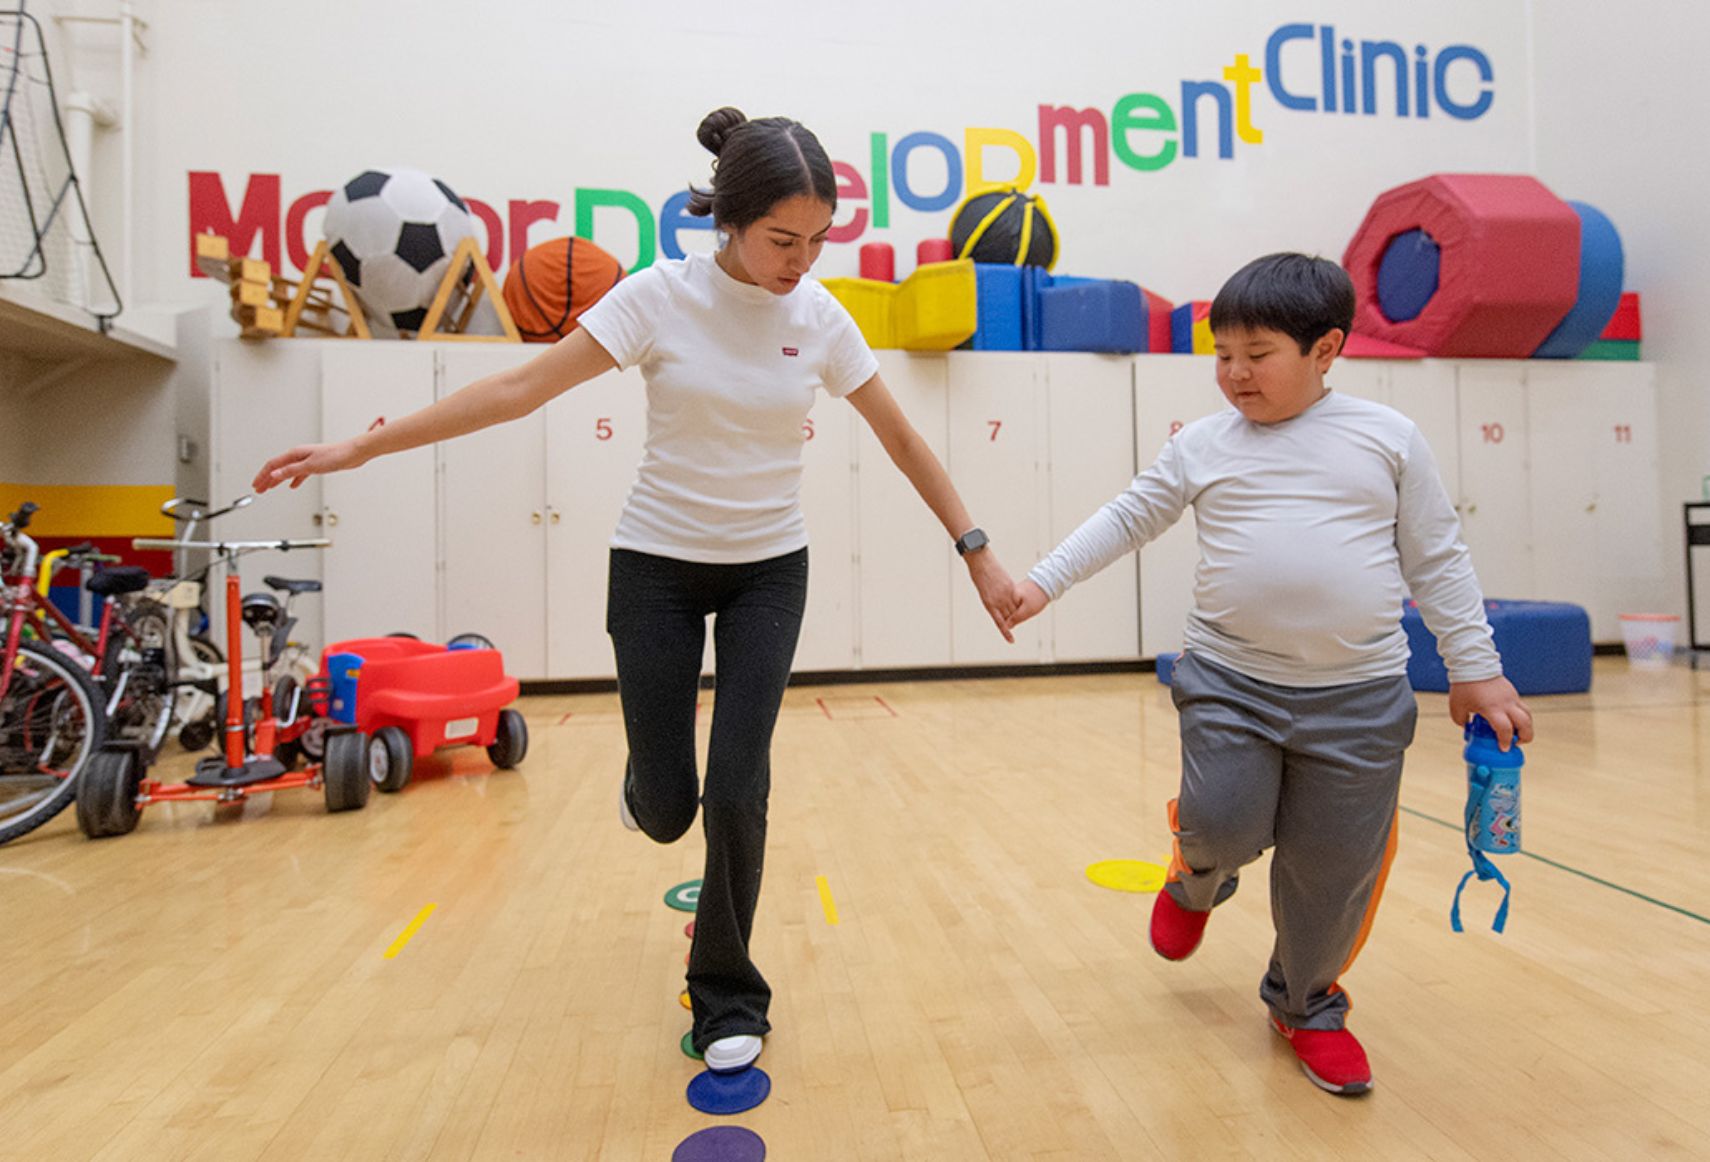 "A woman guides a young boy through a balance exercise in a colorful gym, indicating a developmental clinic."